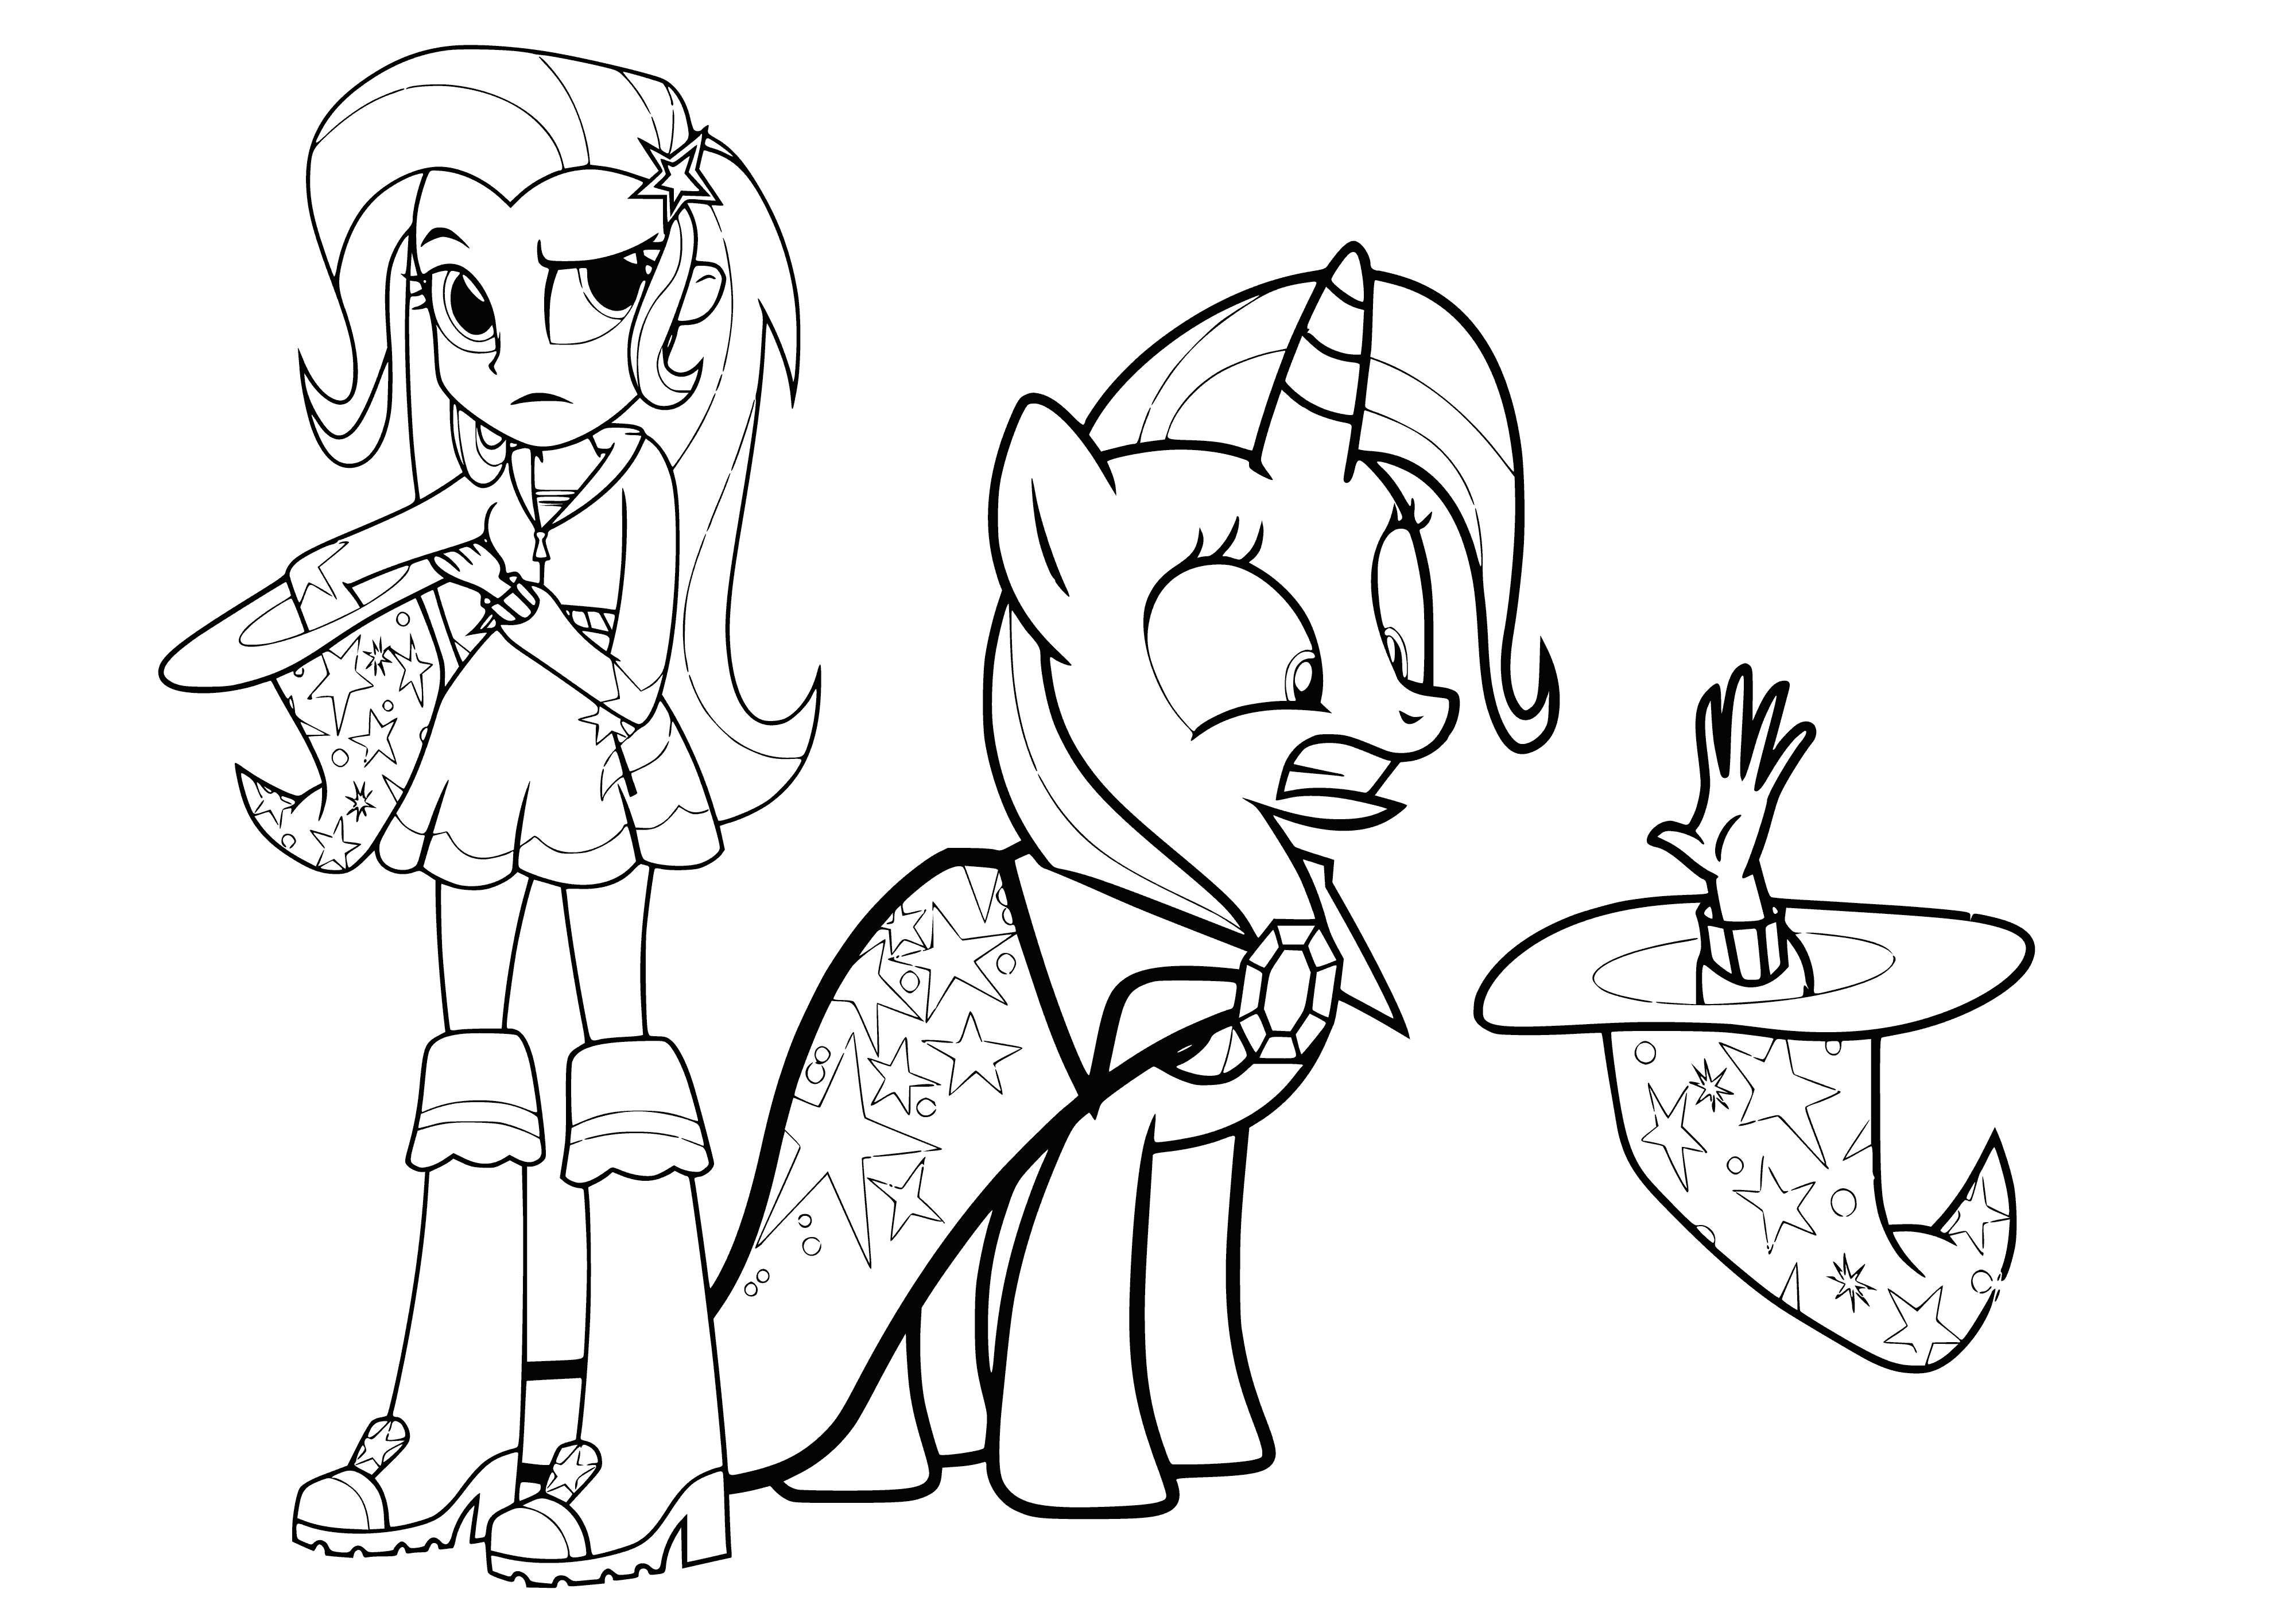 Trixie and her pony stand together, ready to take on the world. Trixie has her wand, her pony, and her confidence. #magic